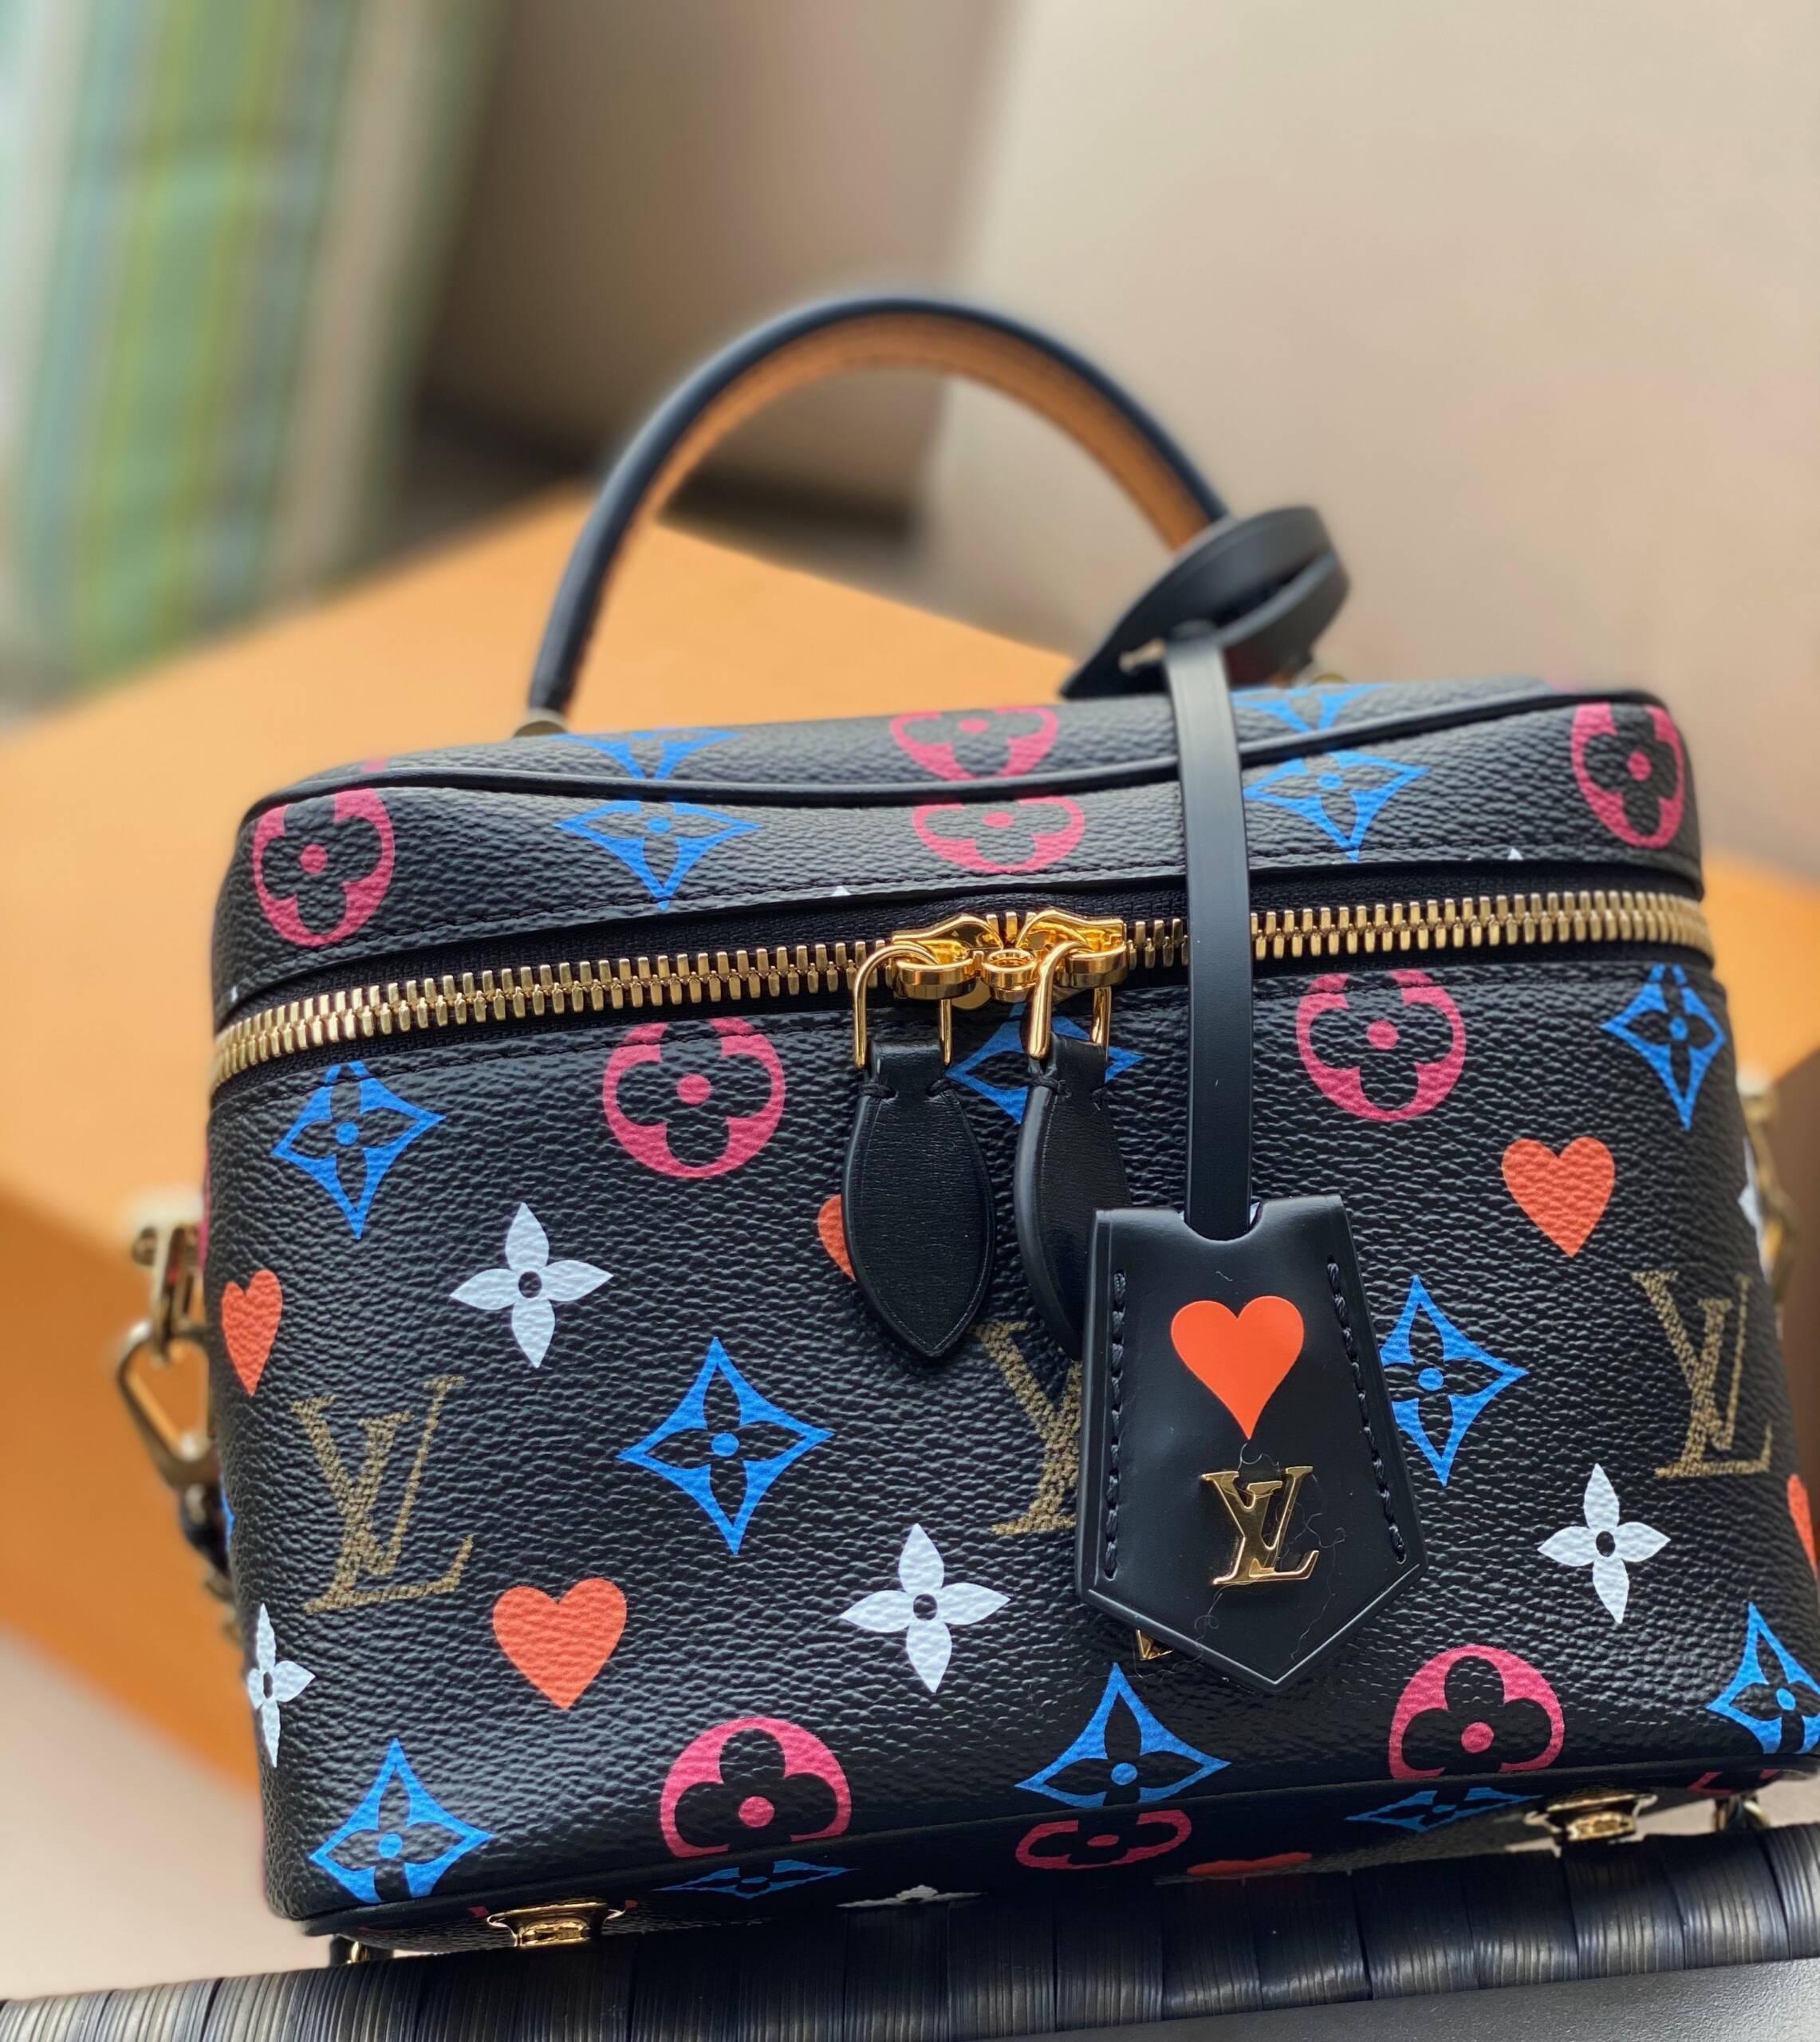 Louis Vuitton newest handbag will bring back memories of your